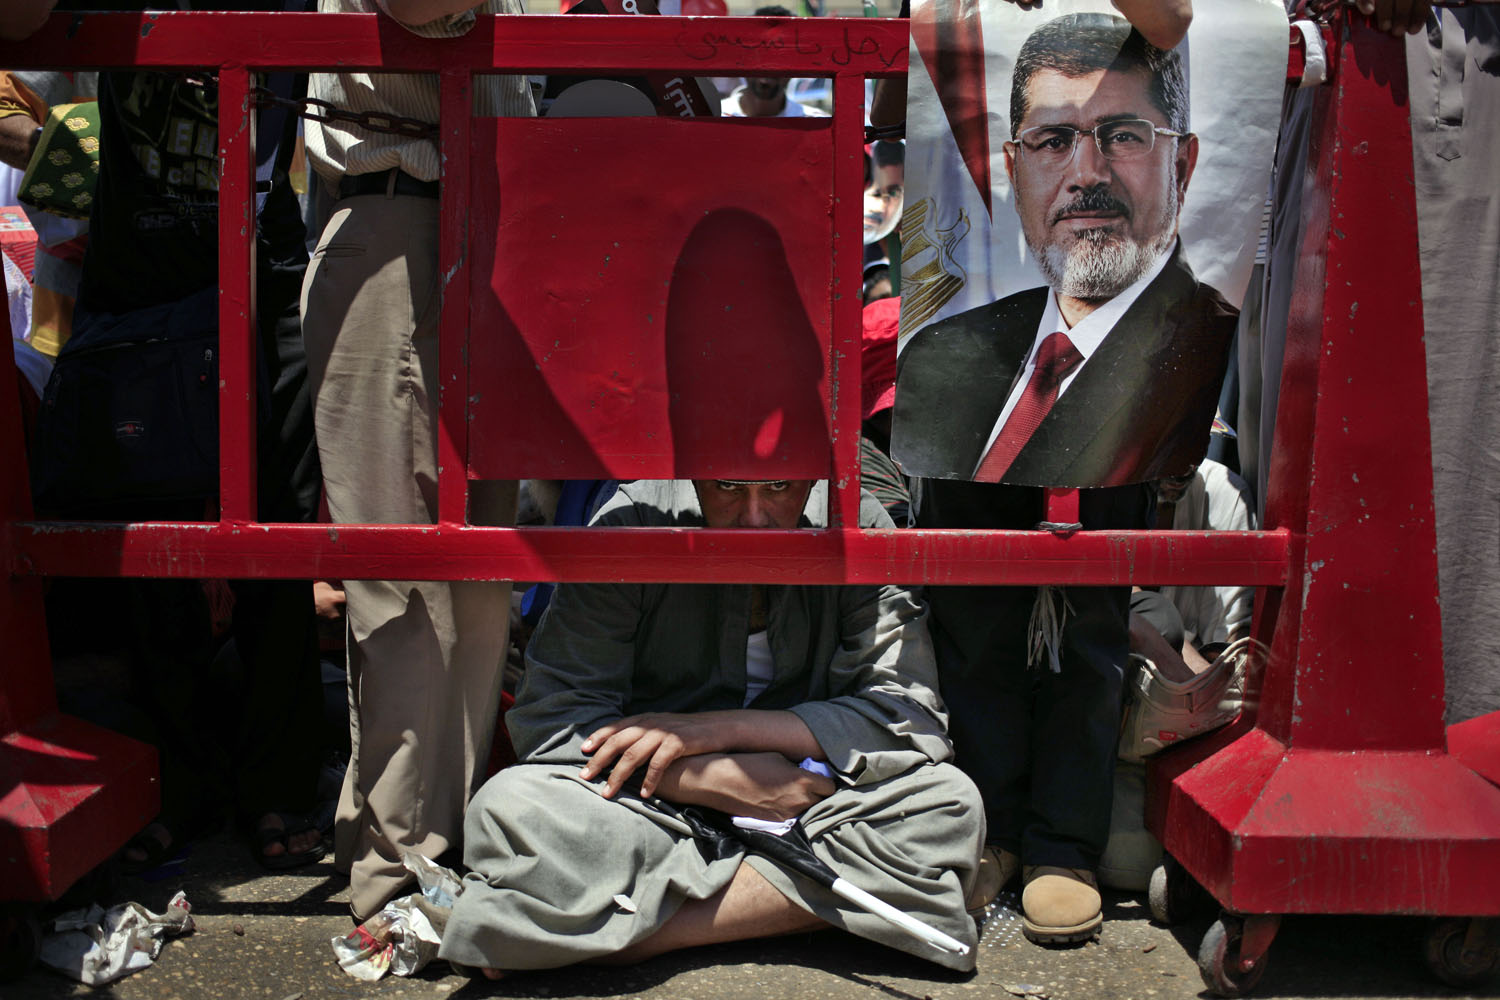 July 26, 2013. Supporters of Egypt's ousted President Mohammed Morsi attend the Friday prayer during a protest at Nasr City, where protesters have installed their camp and hold their daily rally, in Cairo.